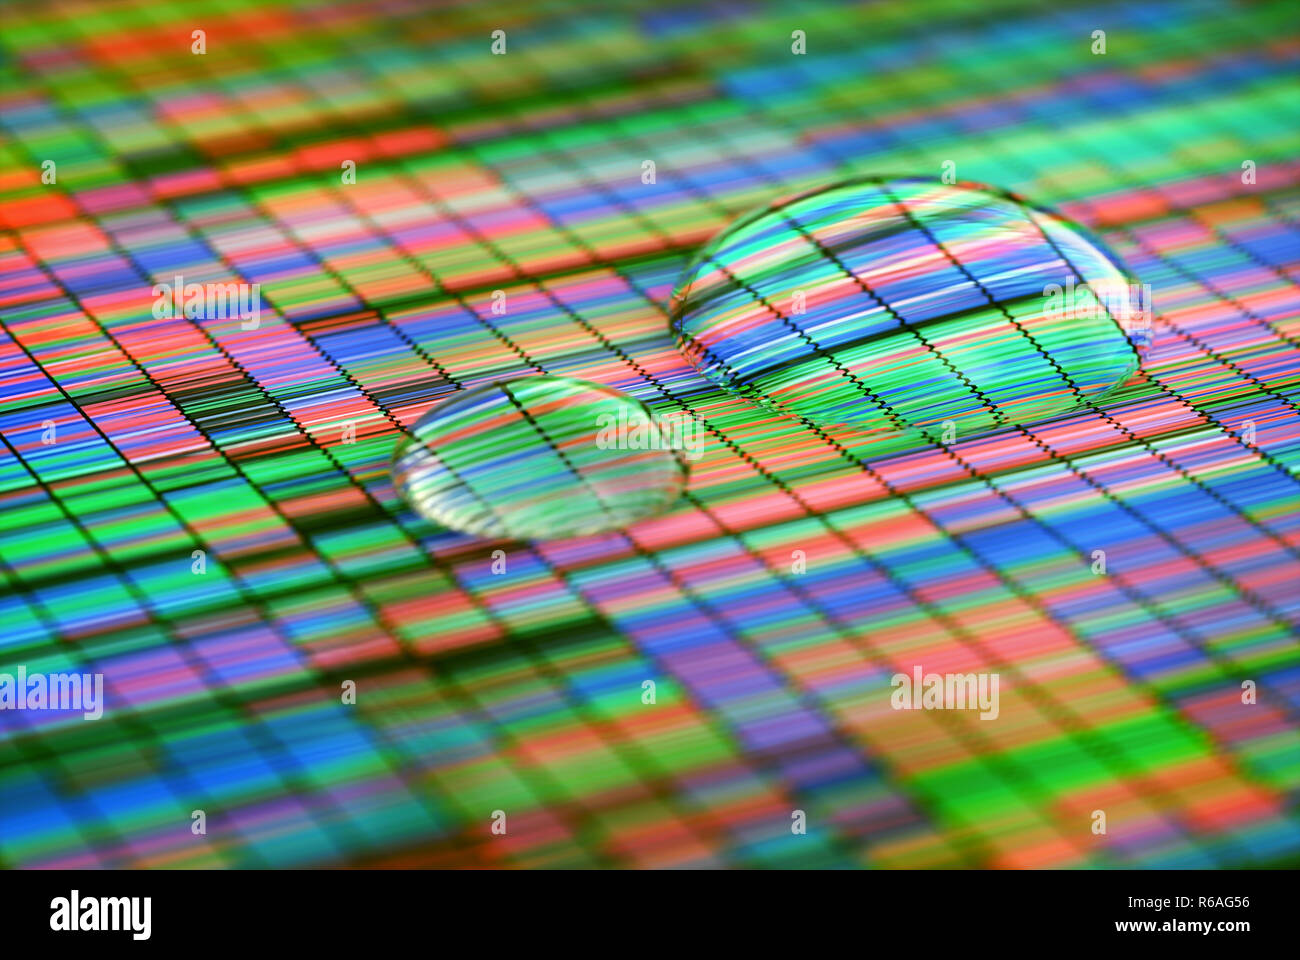 Amplifying Colorful Sanger Sequencing Stock Photo